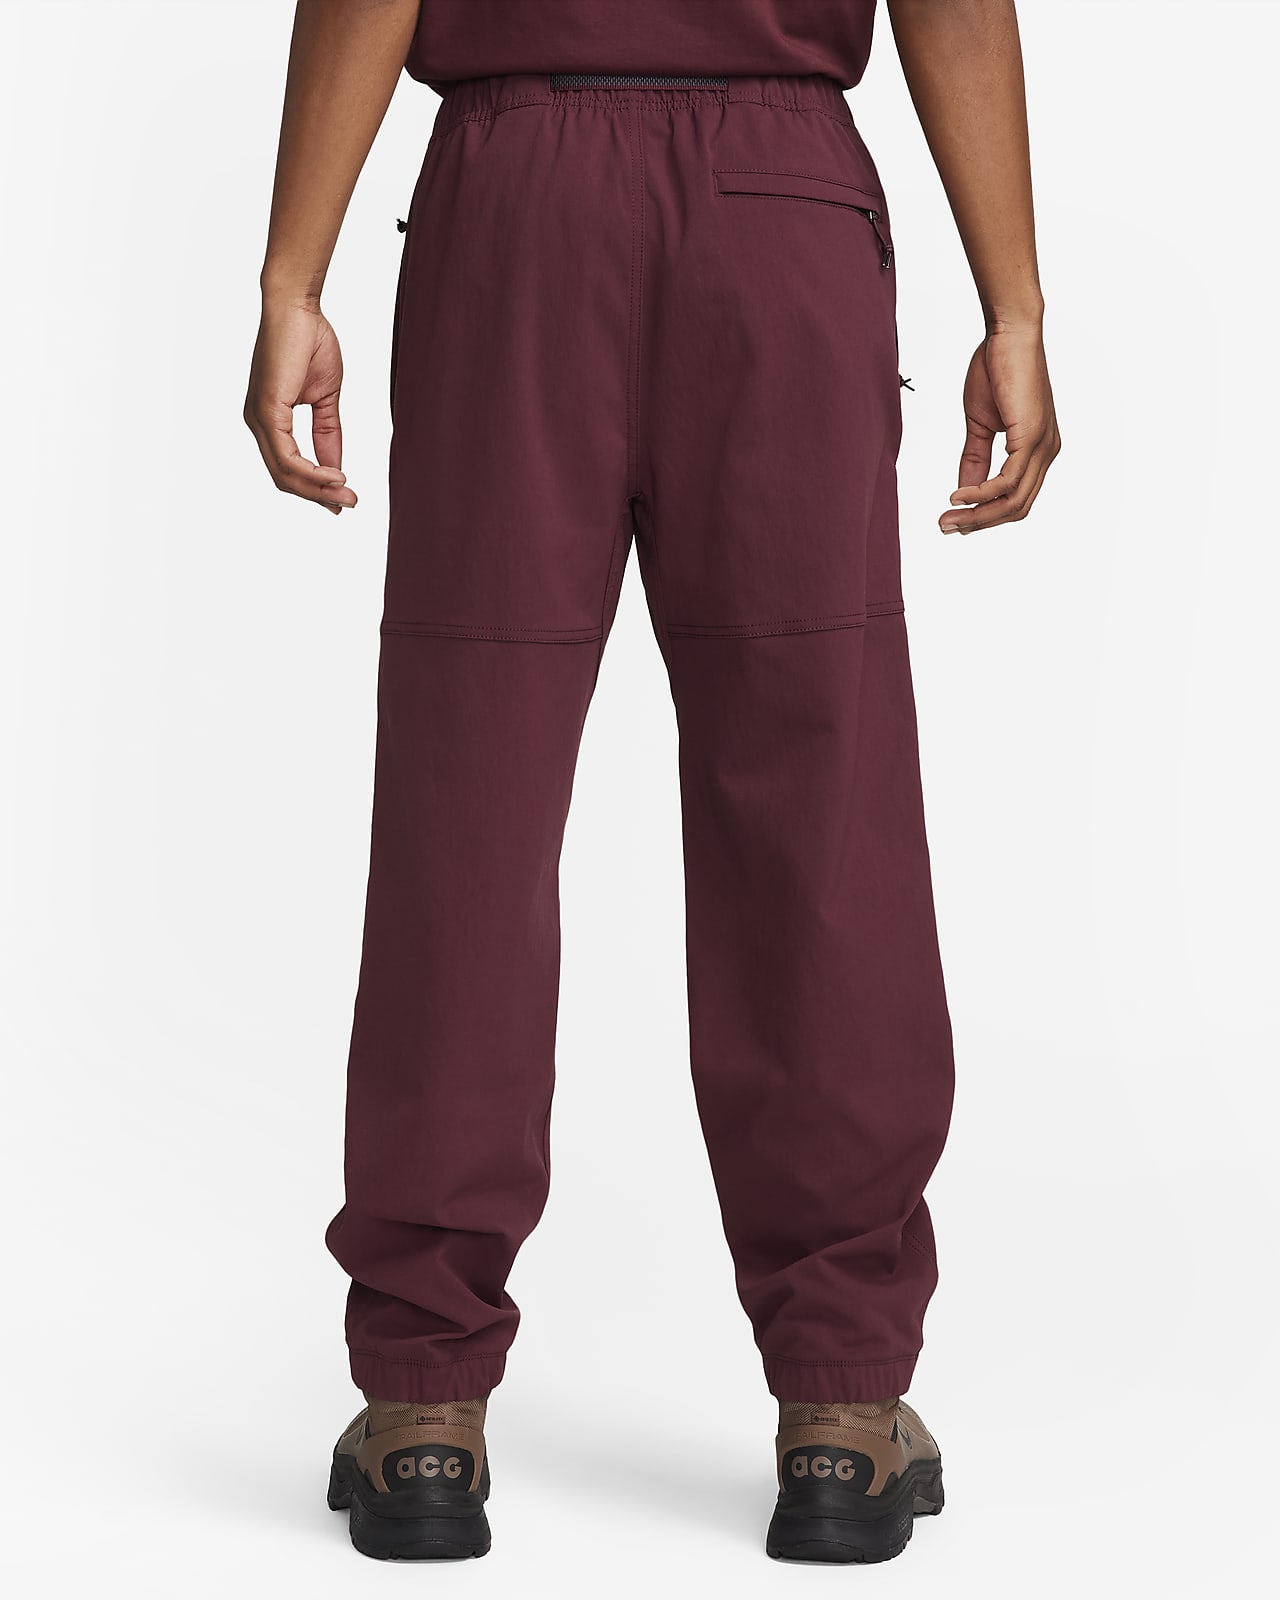 Pink Stretch Convertible Cargo Pants